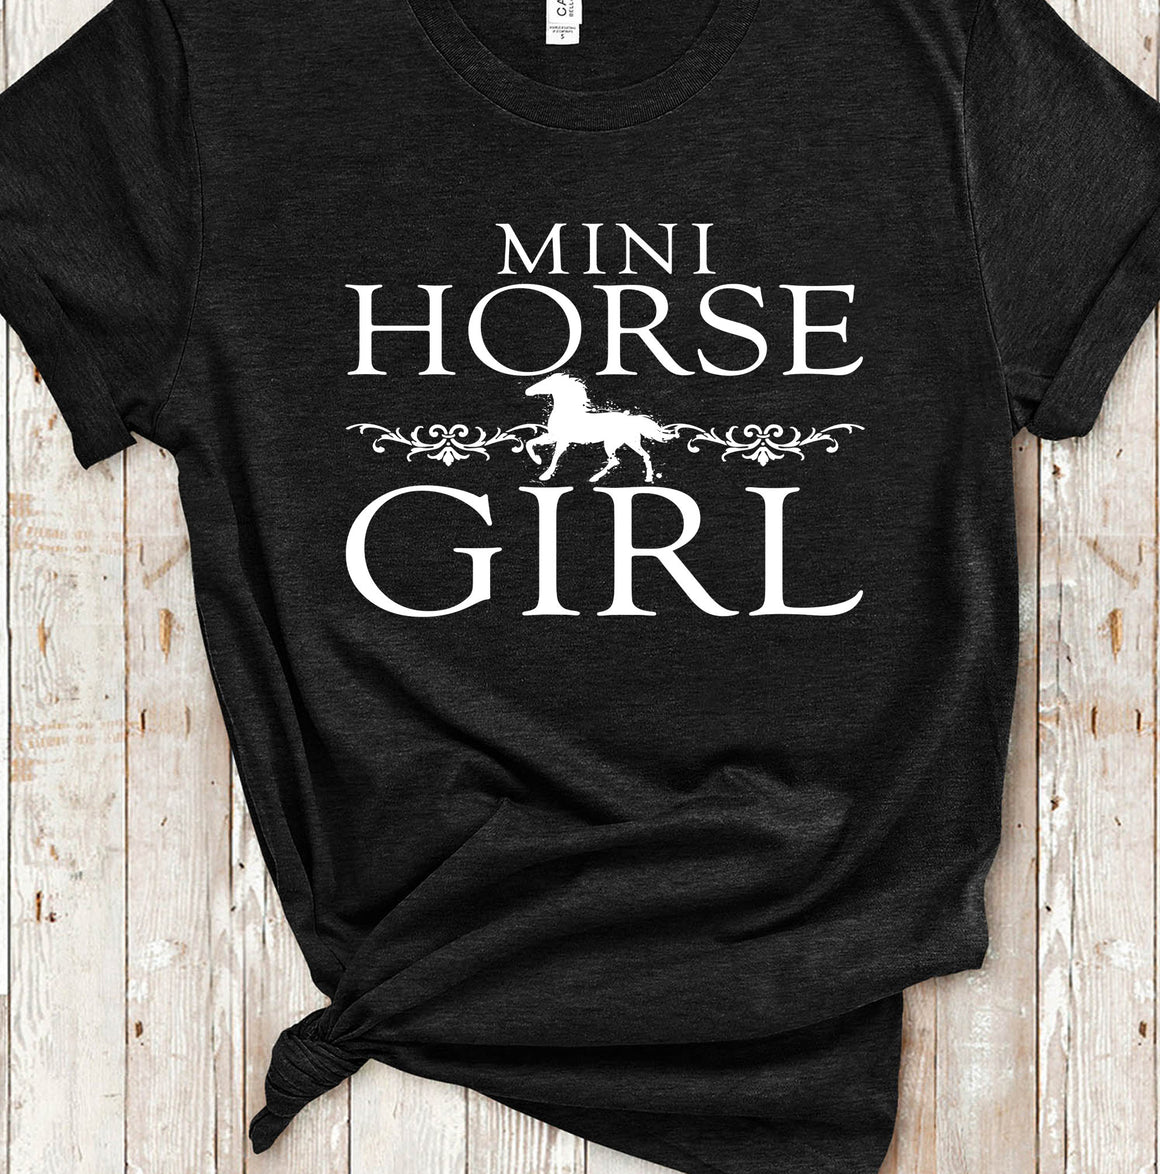 Mini Horse Girl T Shirt - Great Miniature Horse Gifts for Girls or Women Horse Lover Apparel